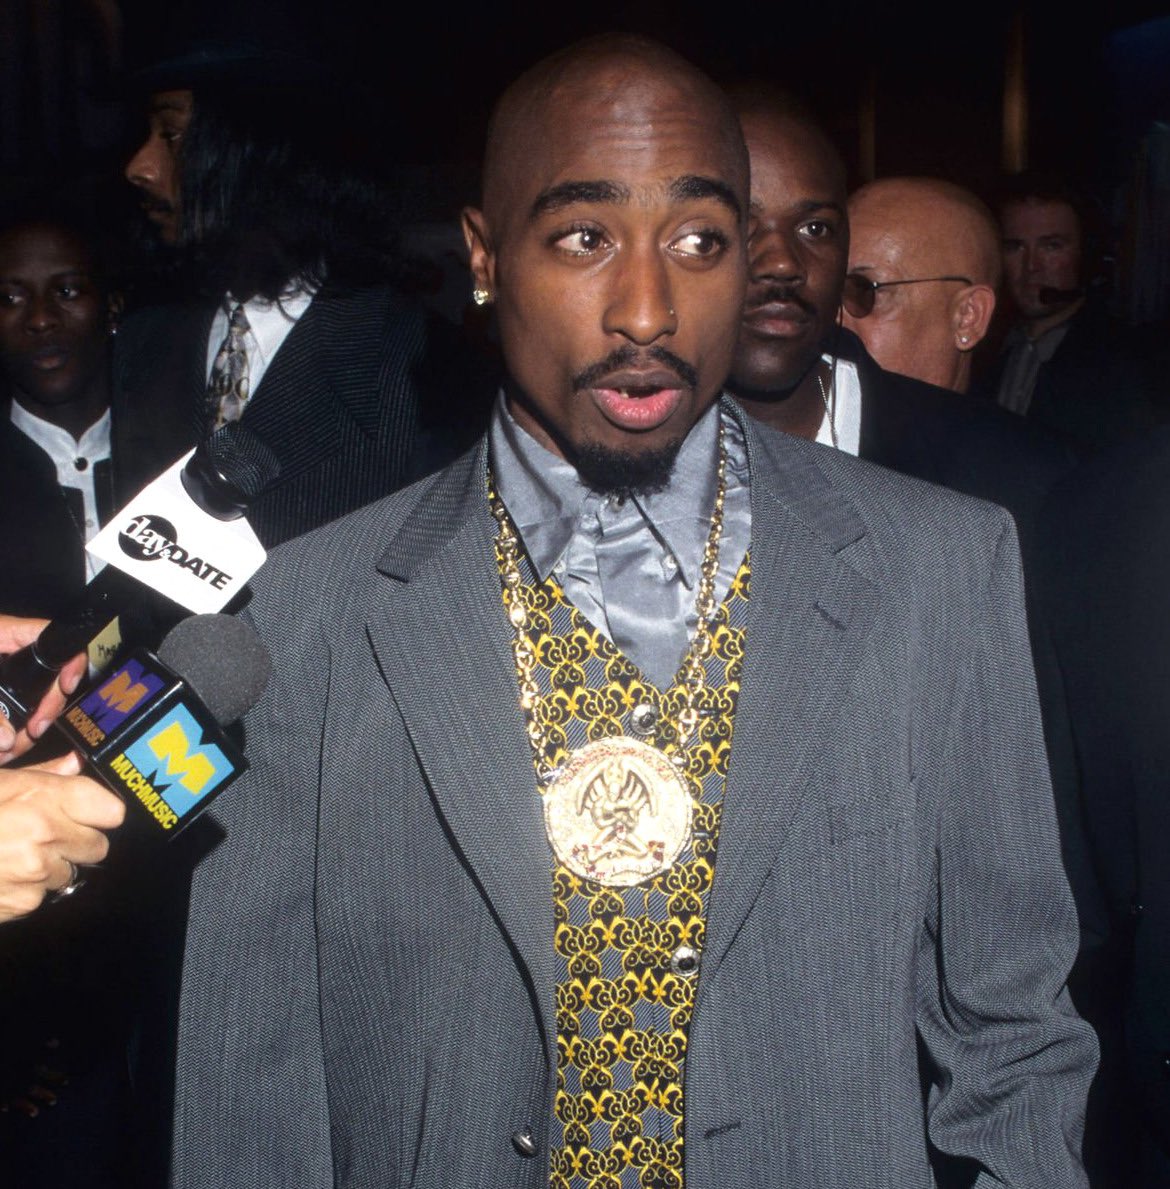 Today would have been 2pacs 51st birthday! What’s your favorite 2pac songs or features❓